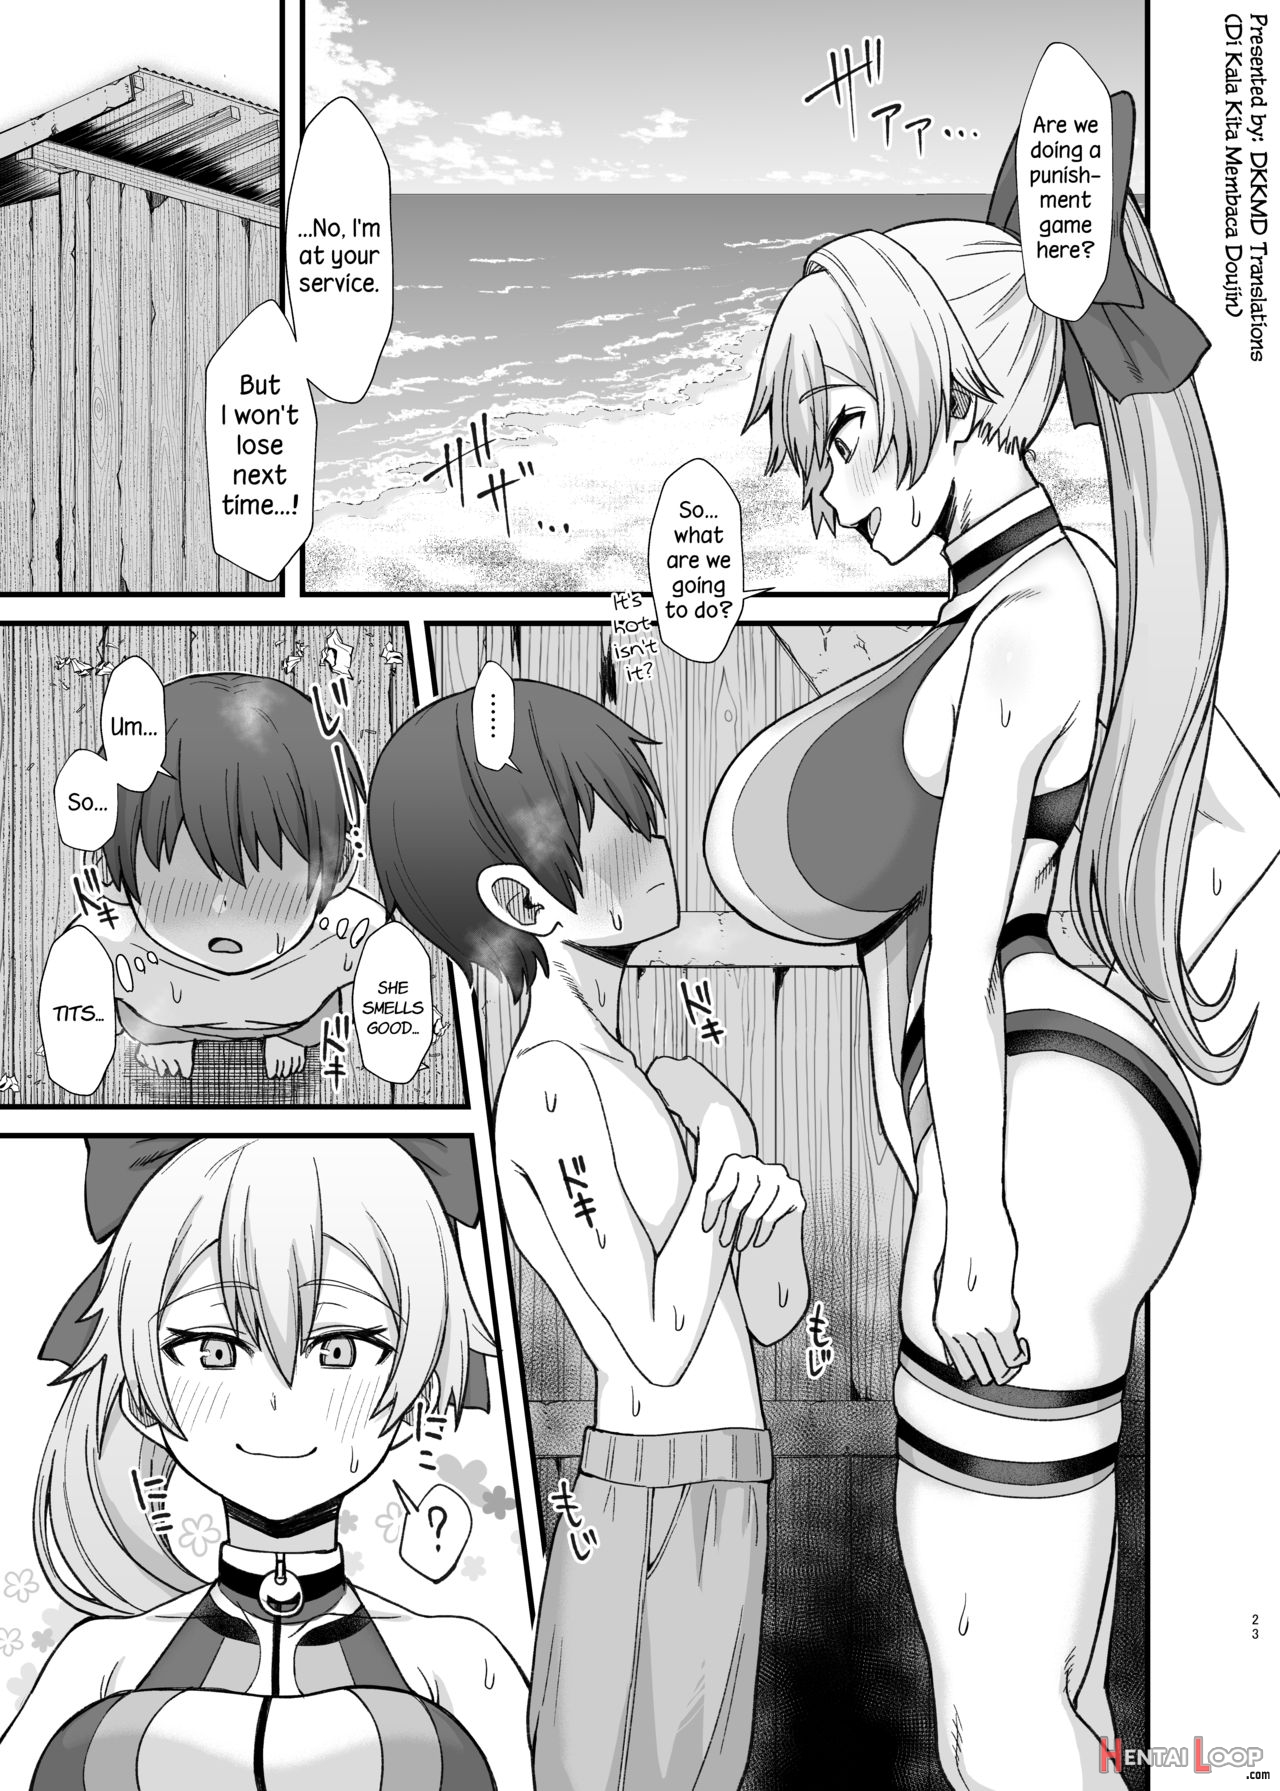 1280px x 1791px - A Story Of Tomoe Gozen Being Punished By A Shota (by Butachang) - Hentai  doujinshi for free at HentaiLoop